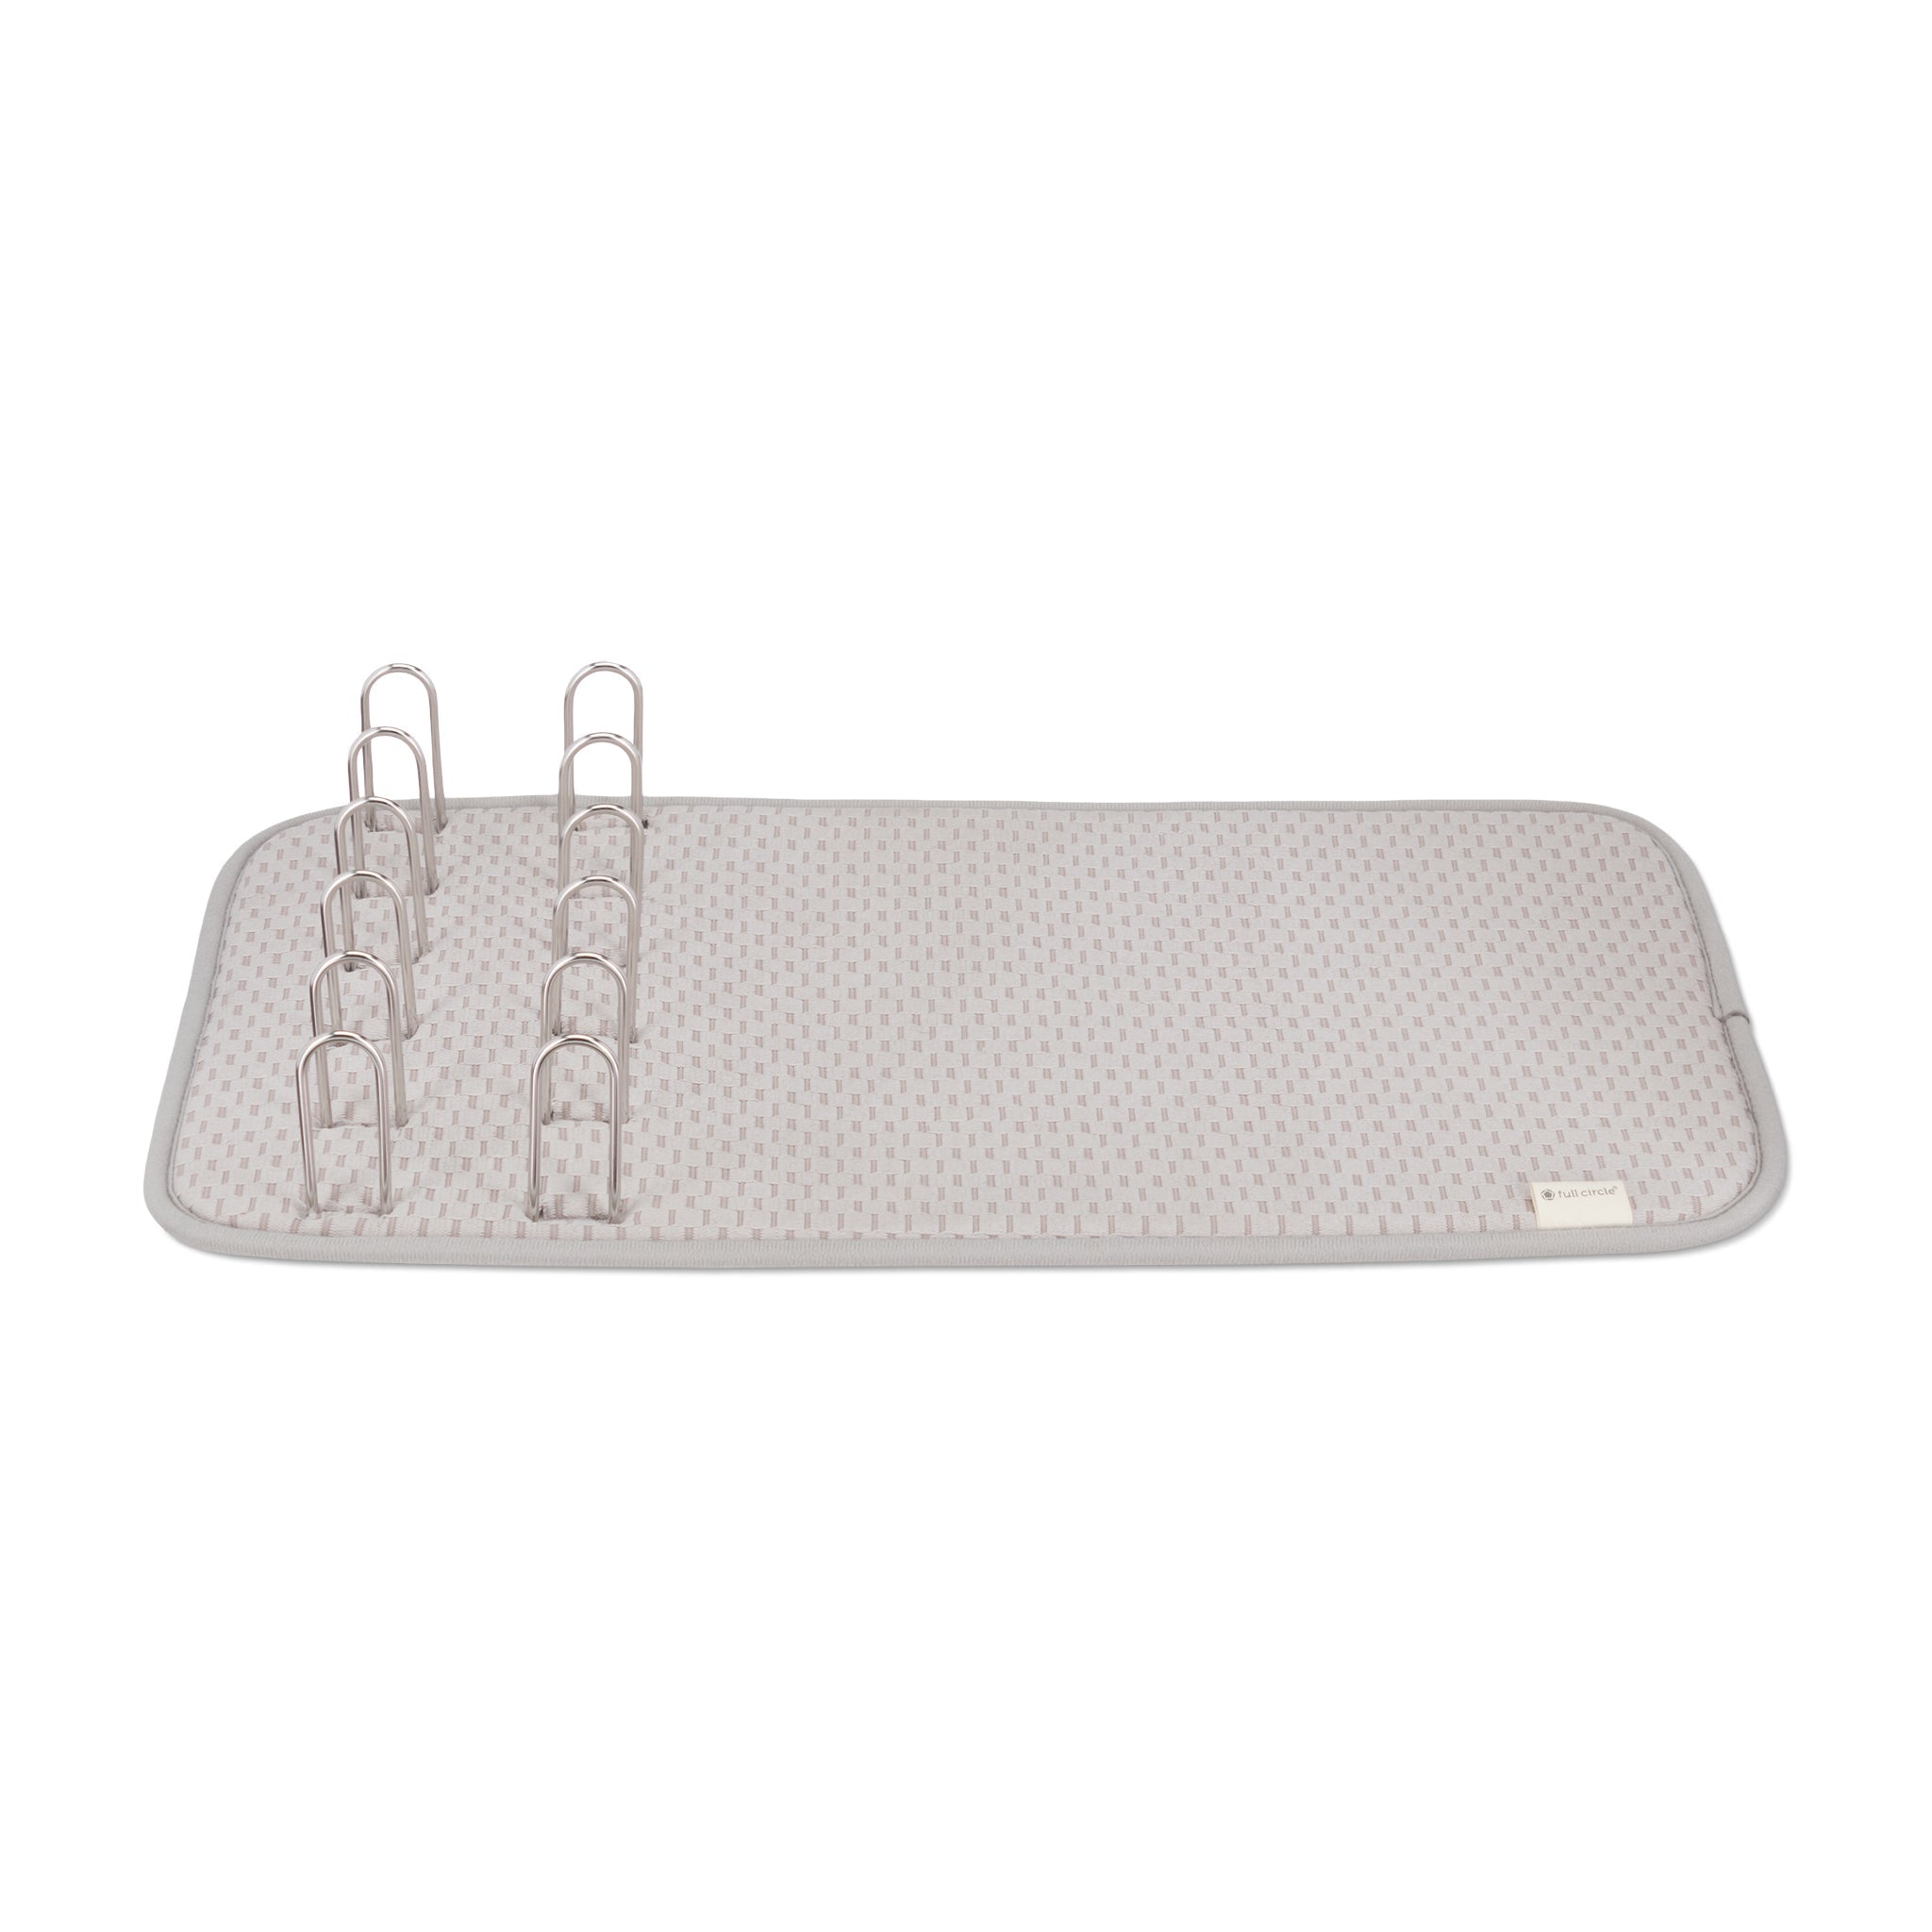 2-in-1 Dish Rack with Recycled Microfiber Mat